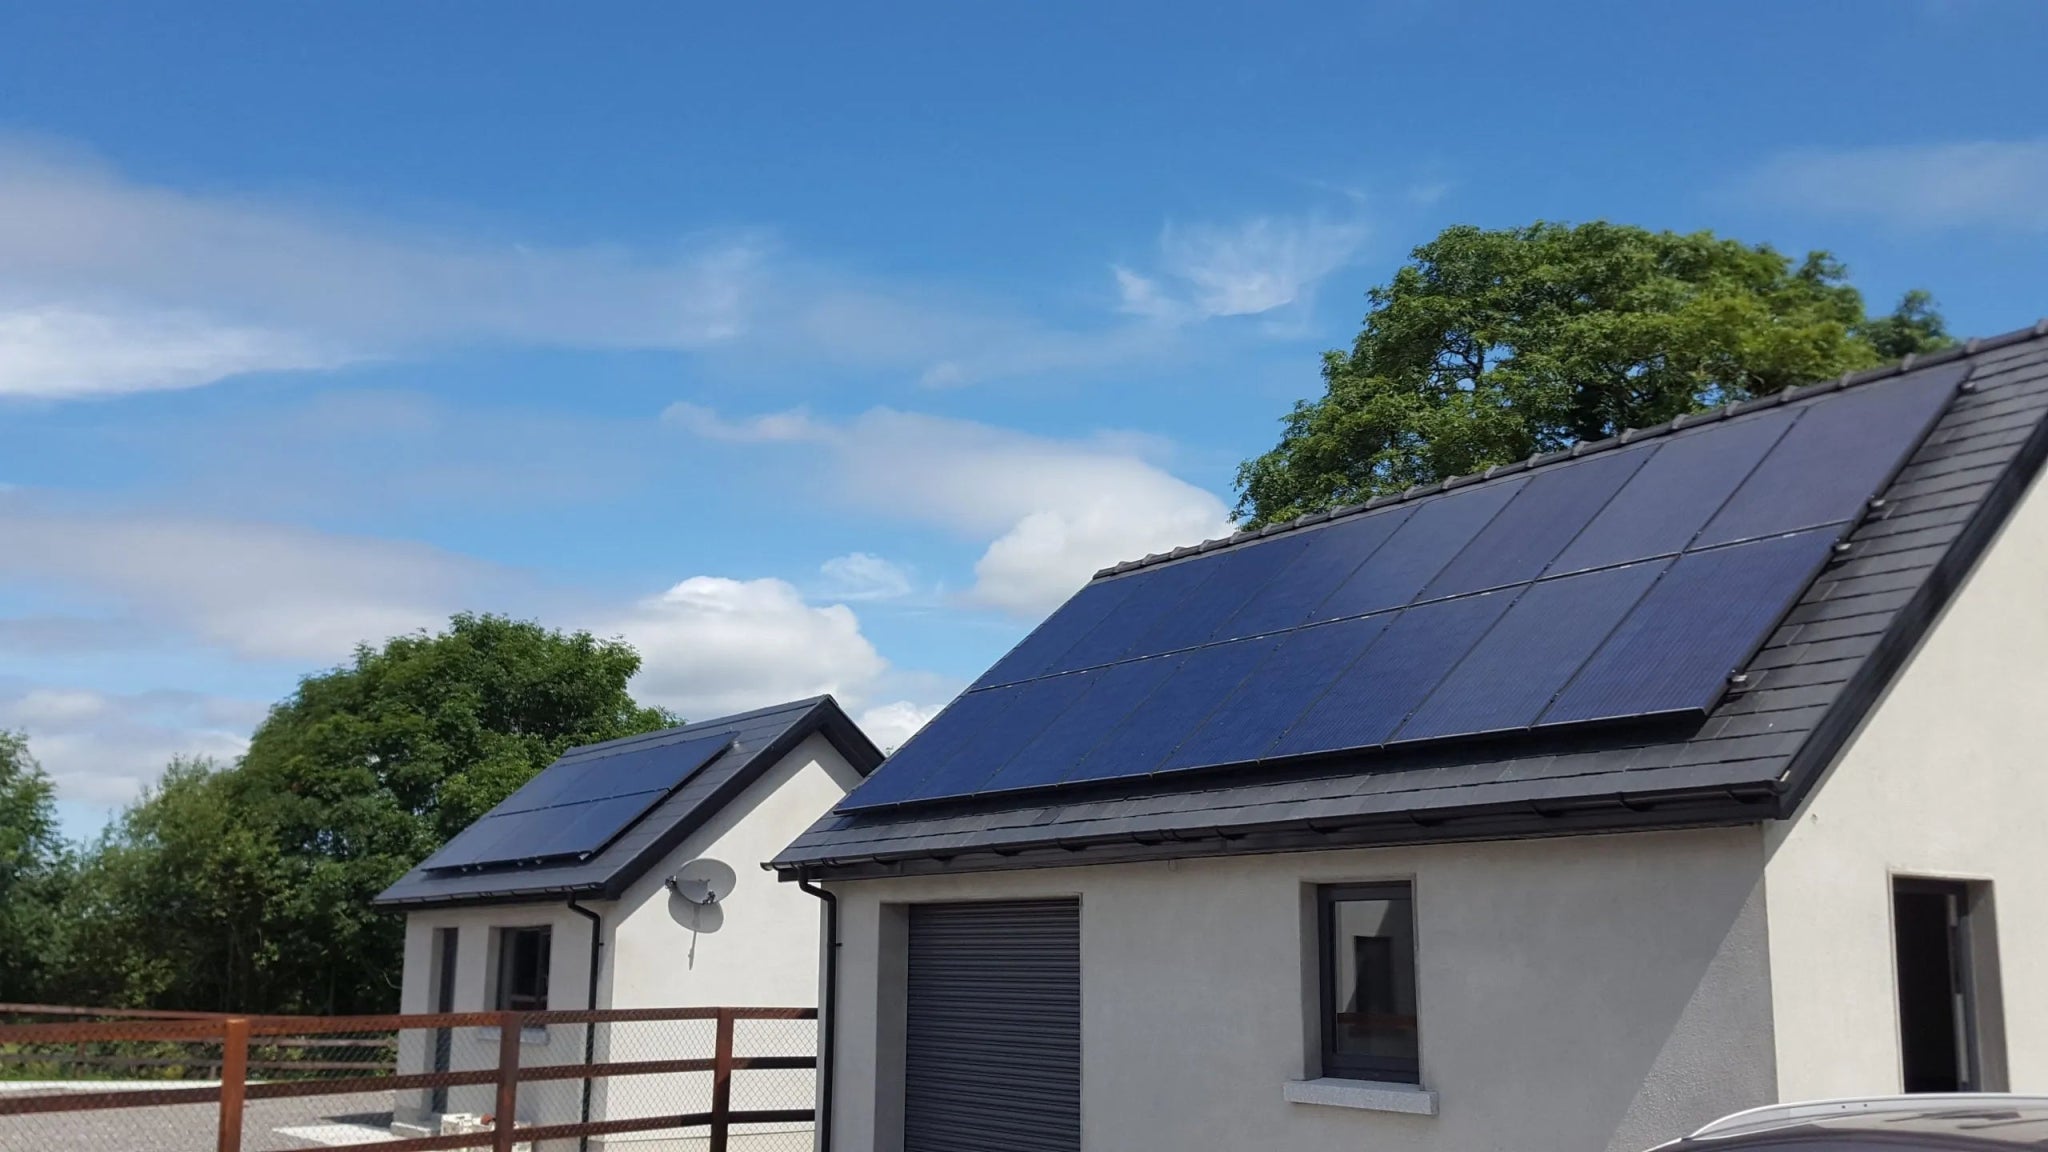 Understanding the Costs and Value of Off-Grid Solar Systems